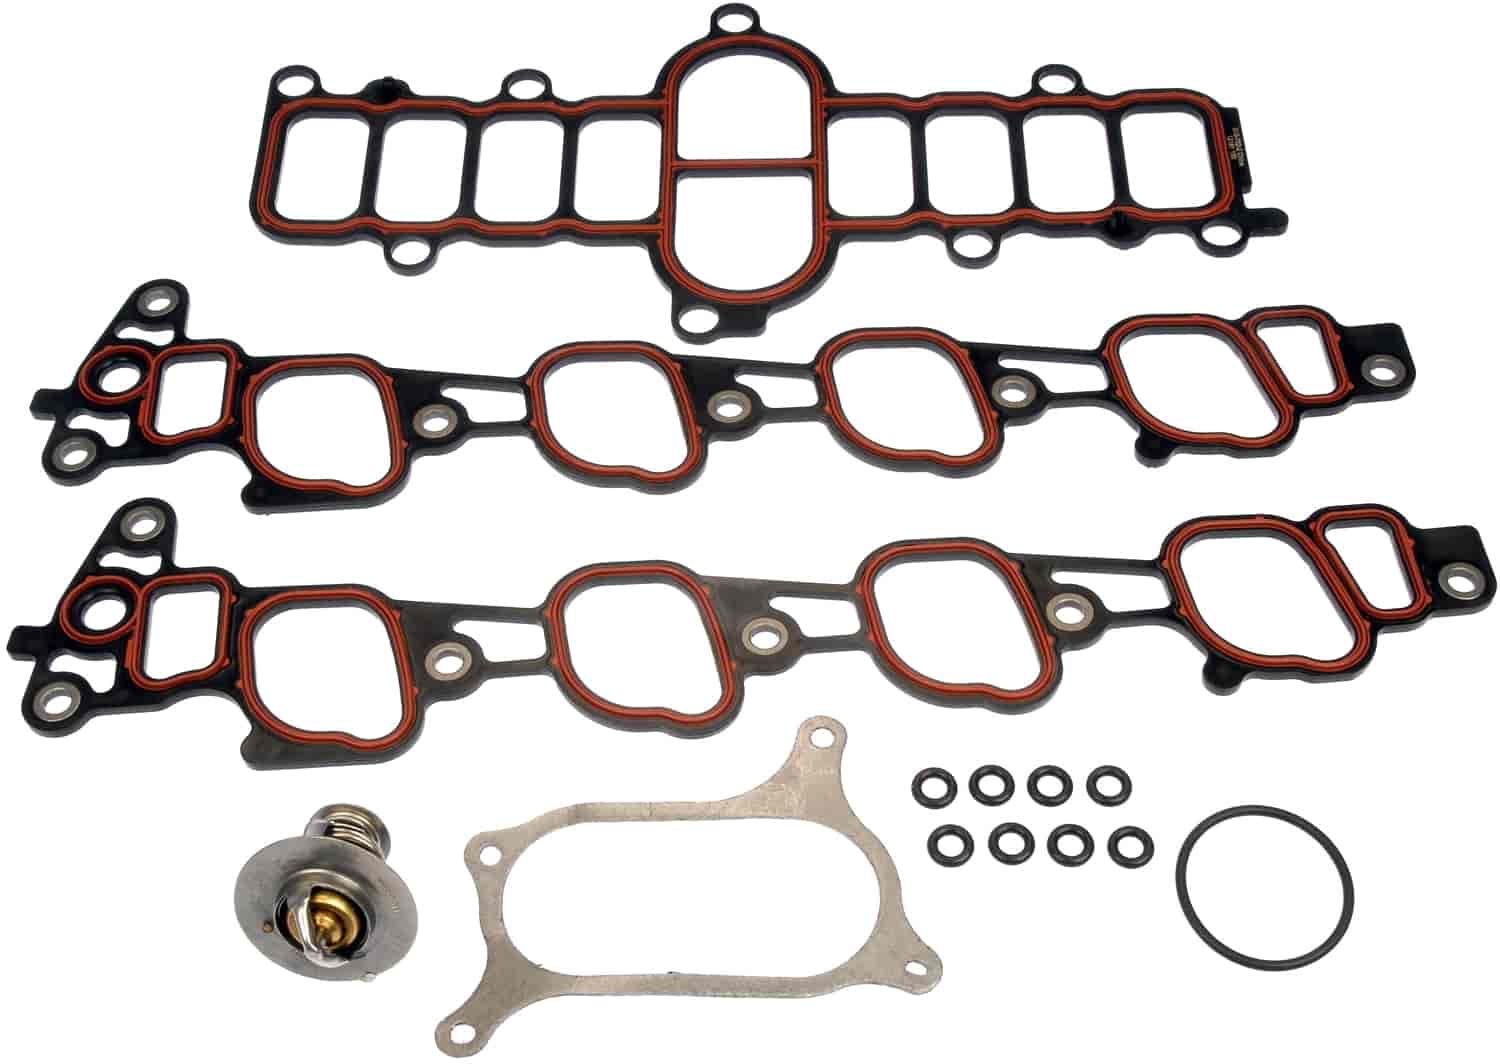 Gasket Kit Includes Plenum And Manifold Gaskets - Thermostat And Oring